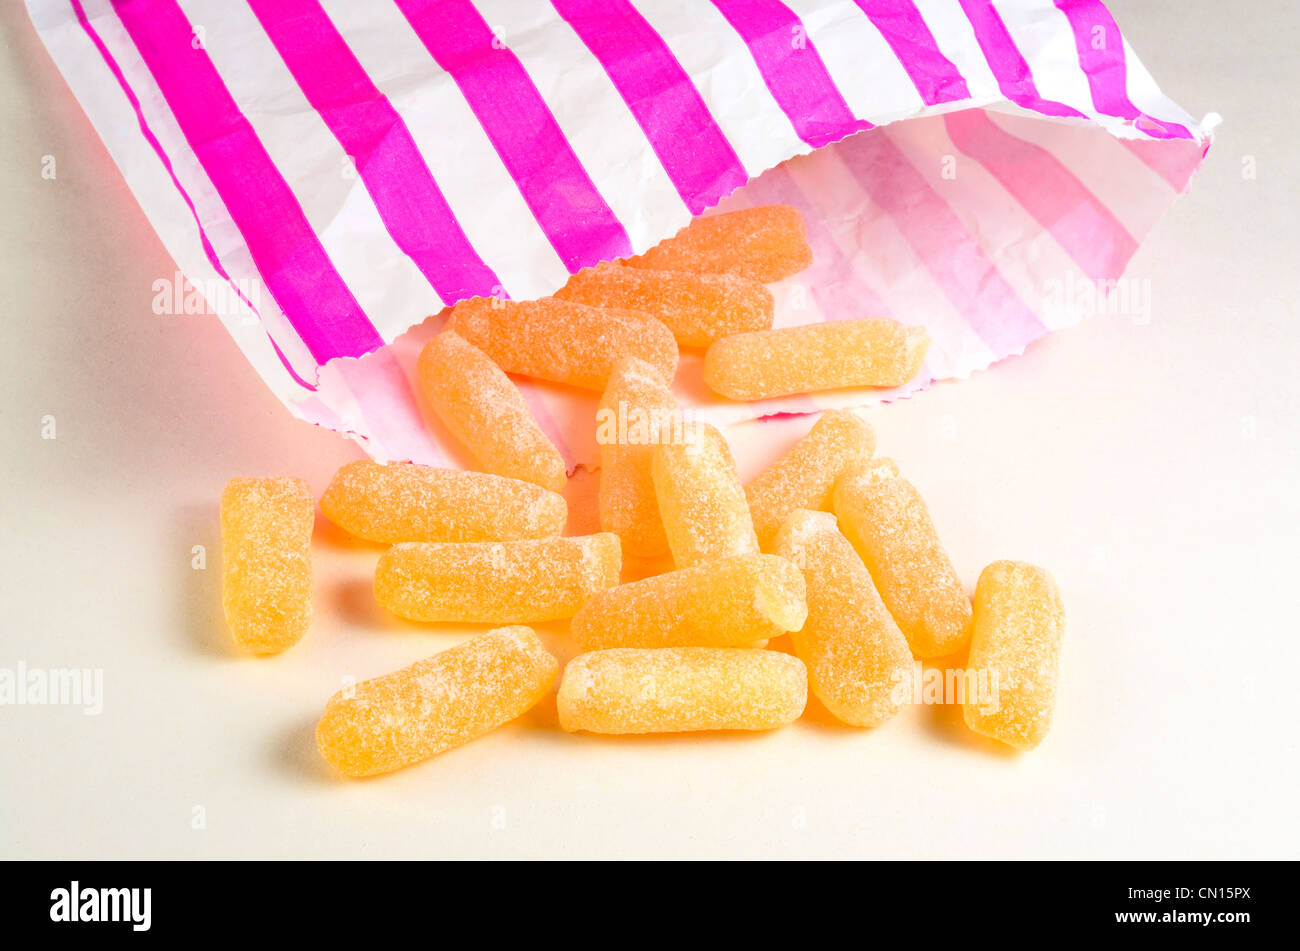 Cough candy with pink striped paper bag Stock Photo